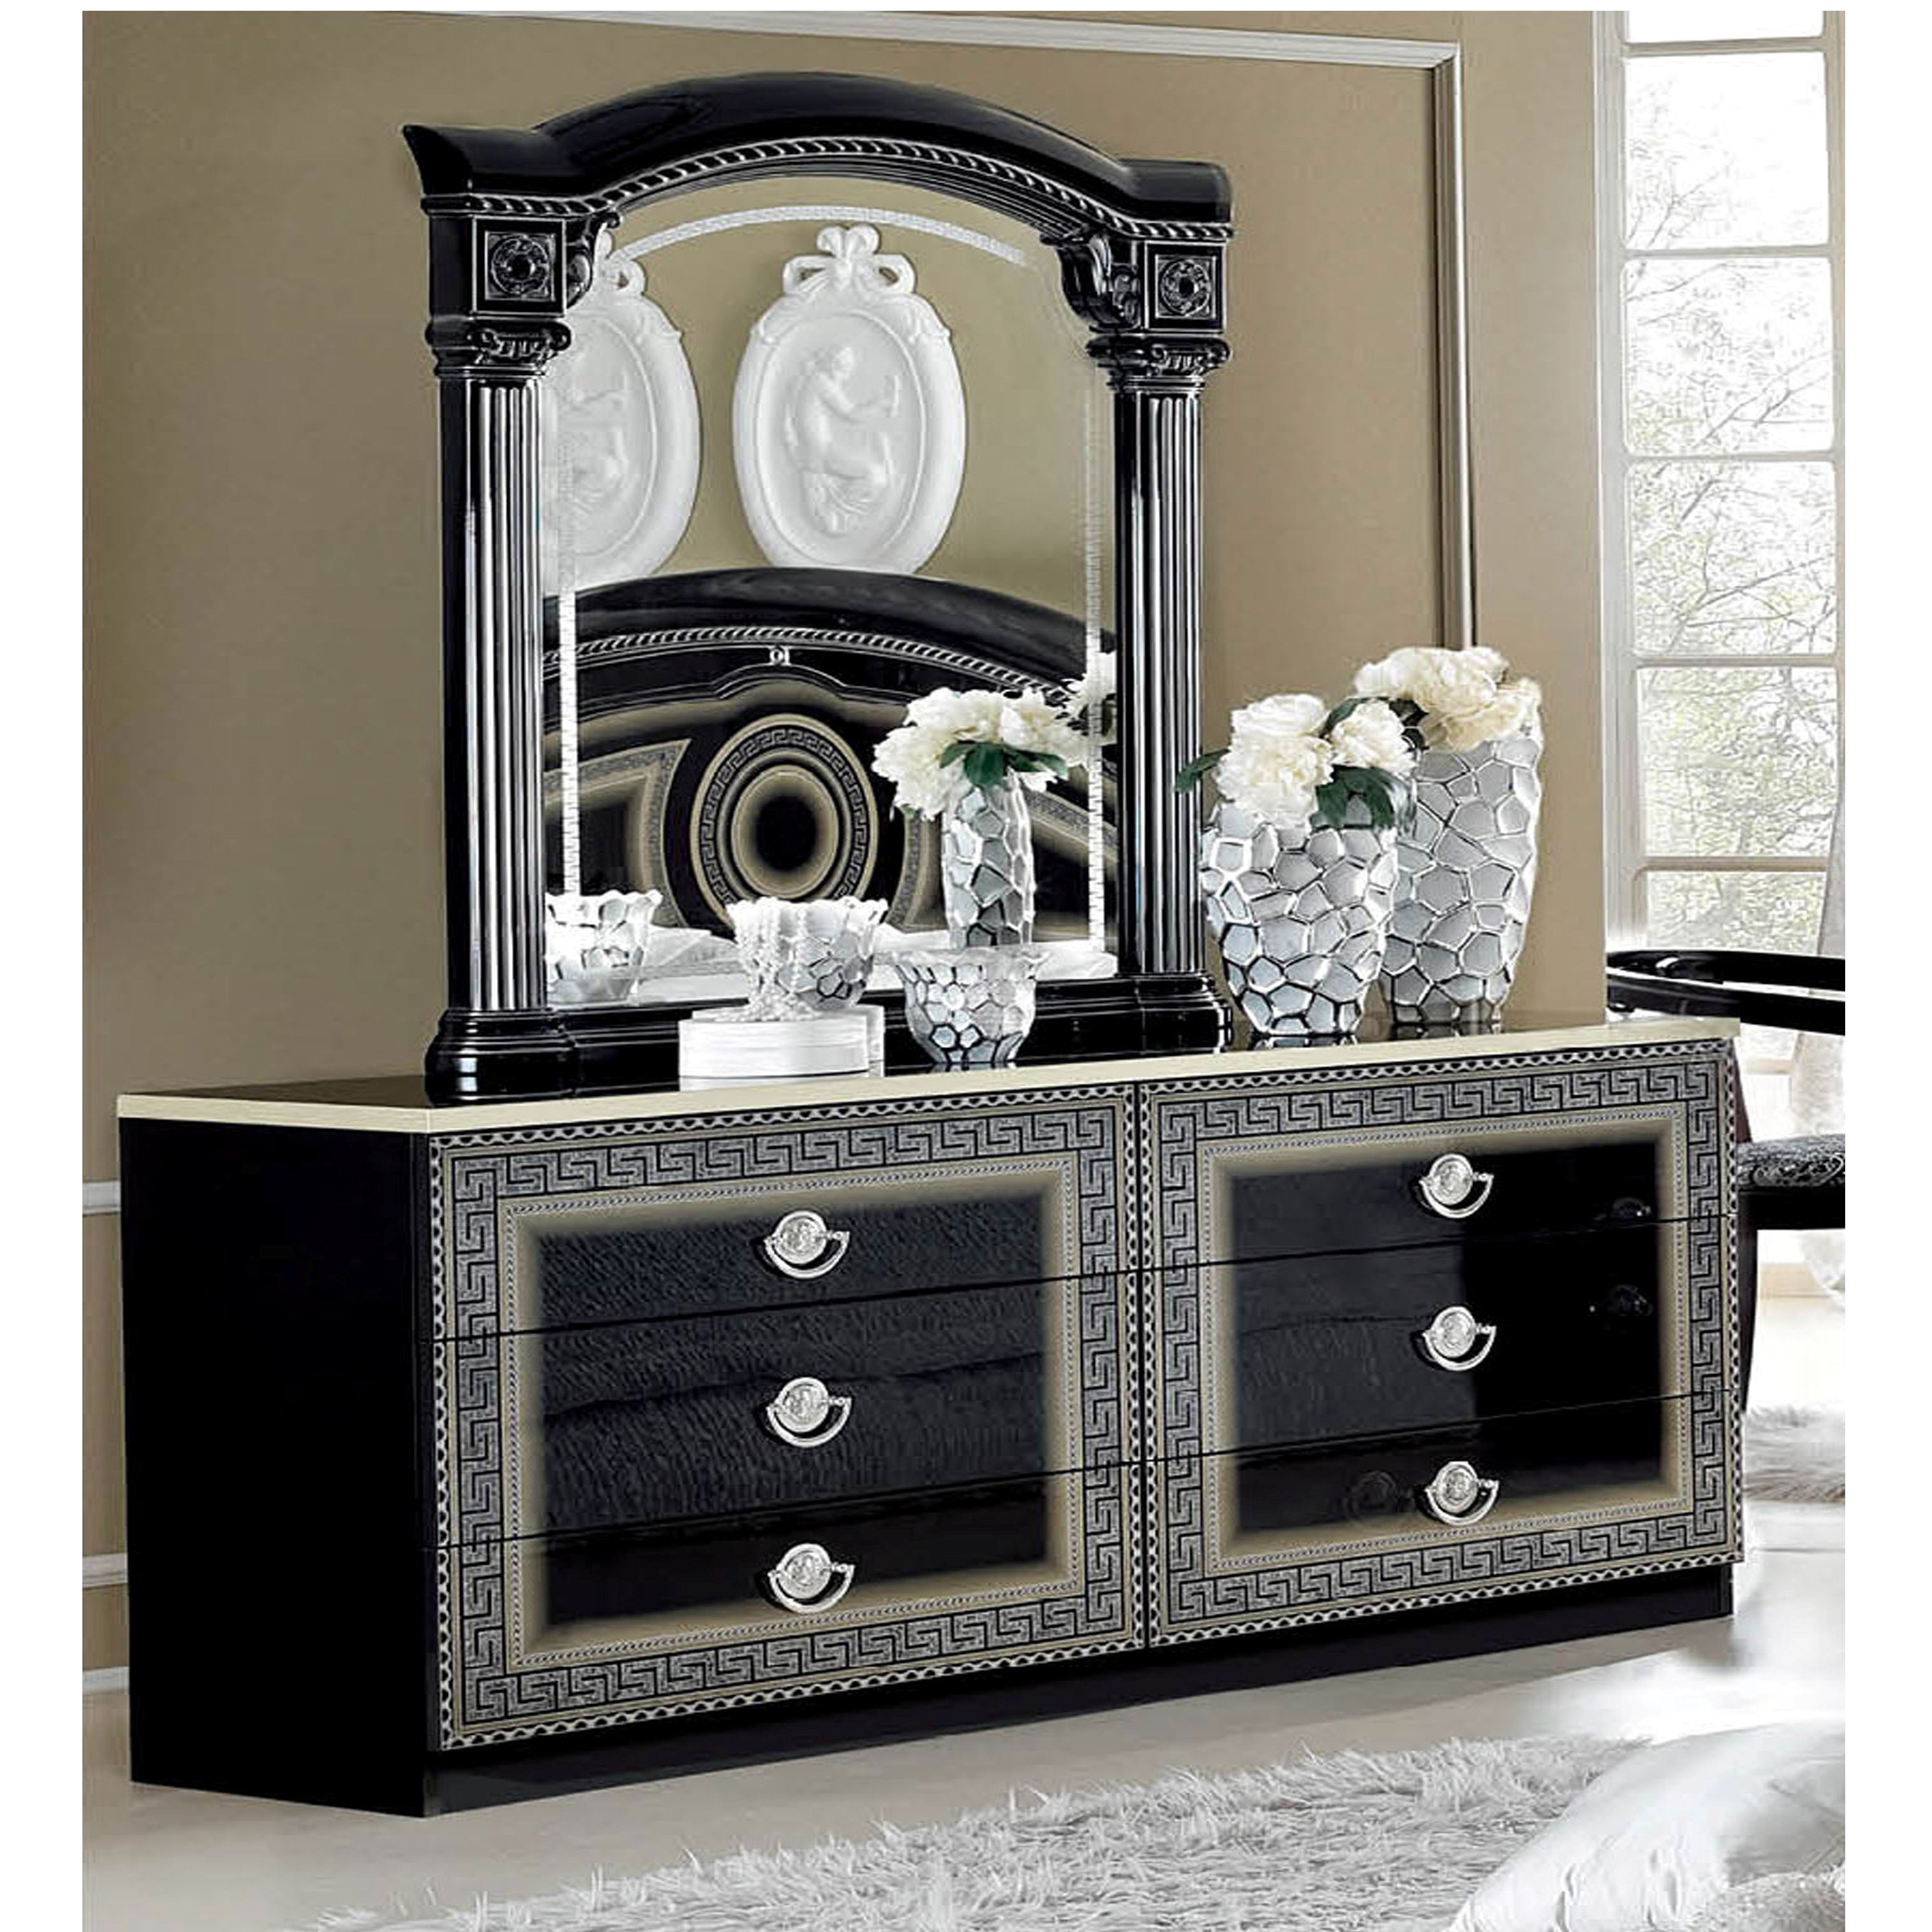 Shop Luca Home Black Silver Dresser And Mirror Overstock 10203333